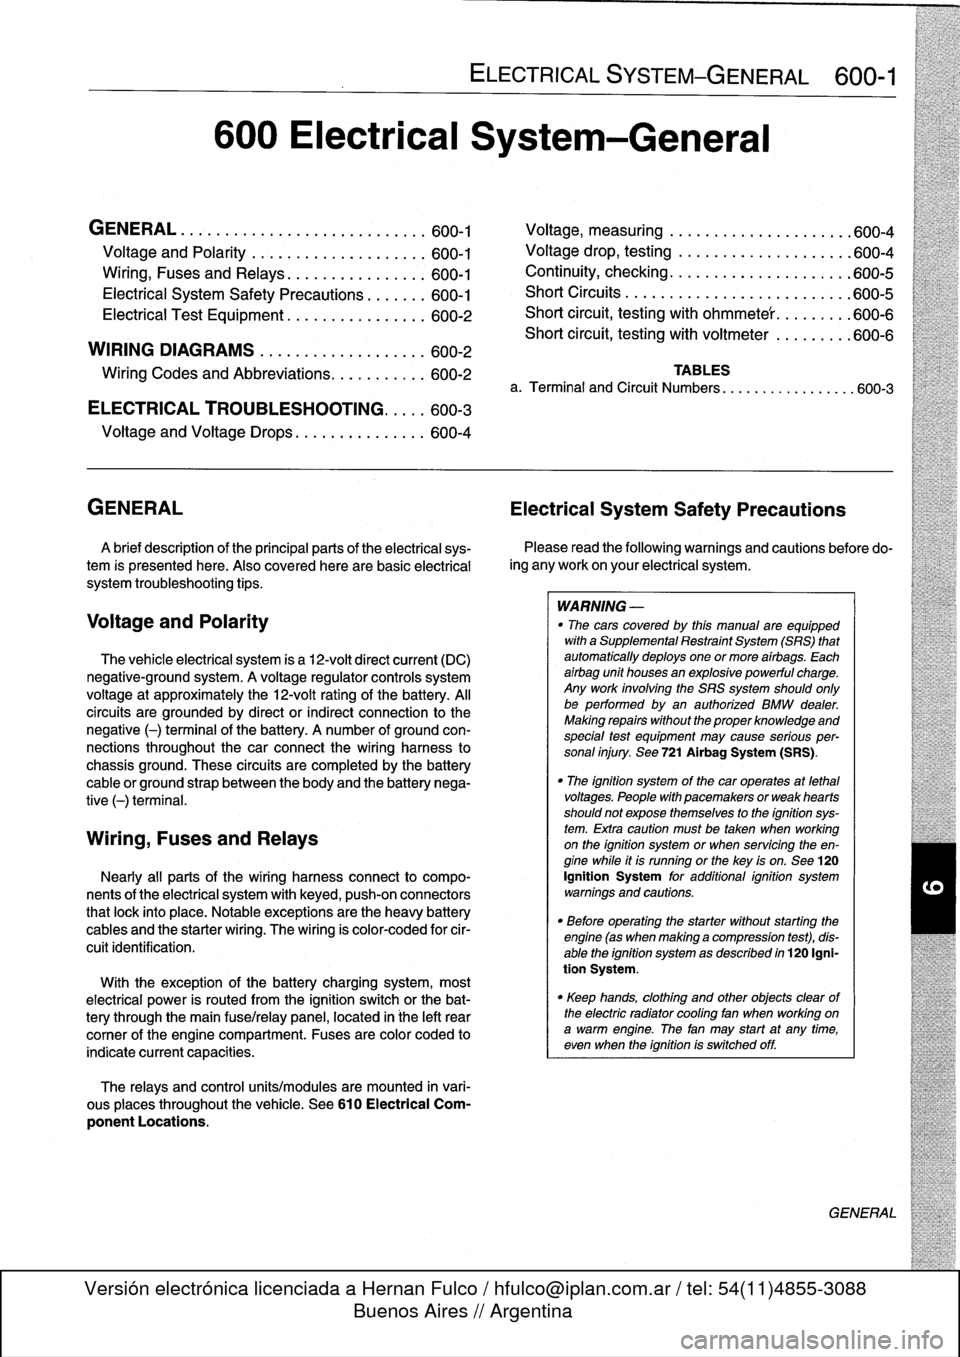 BMW 323i 1995 E36 Workshop Manual 
600
Electrical
System-General

GENERAL
.
...........
.
.
.
.
.
.
.
.
.
...
.
...
600-1

Voltage
and
Polarity
........
.
.
.
.
.
.
.
.....
600-1

Ming,
Fuses
and
Relays
............
.
.
.
.
600-1

Ele